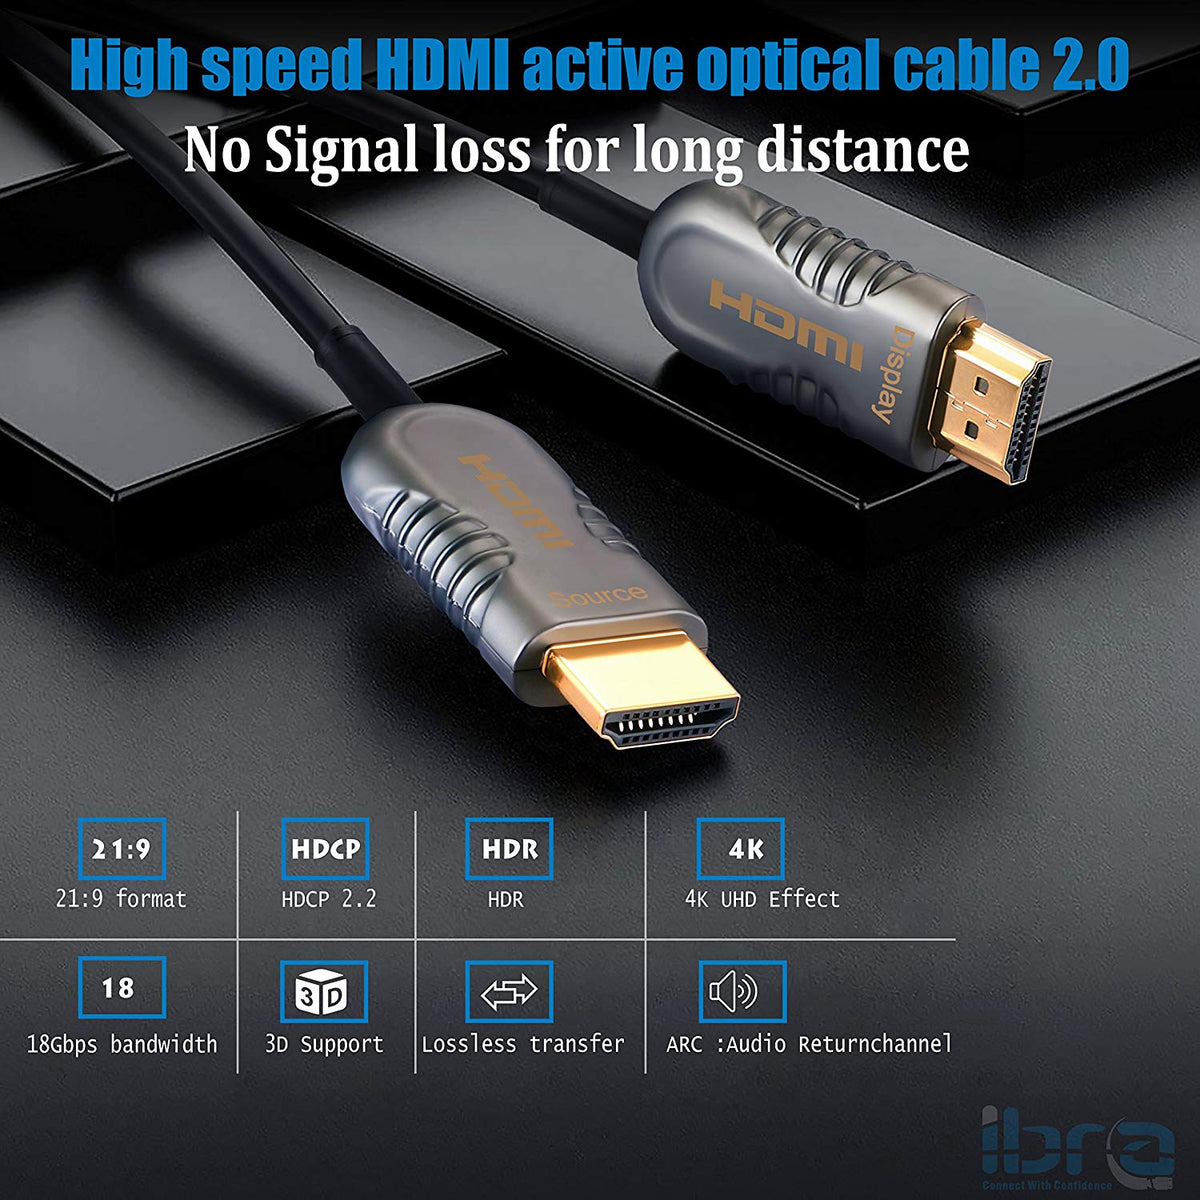 20M Fiber Optic HDMI High Speed Cable v2.0 18Gbps HDMI Lead Support 4K@60Hz/4:4:4/3D/4K HDR HDCP 2.2 for Apple TV, HDTV, Roku TV Box, Xbox One X, Home Theater, PS4, PS3 etc - IBRA OPTICAL HDMI Cable